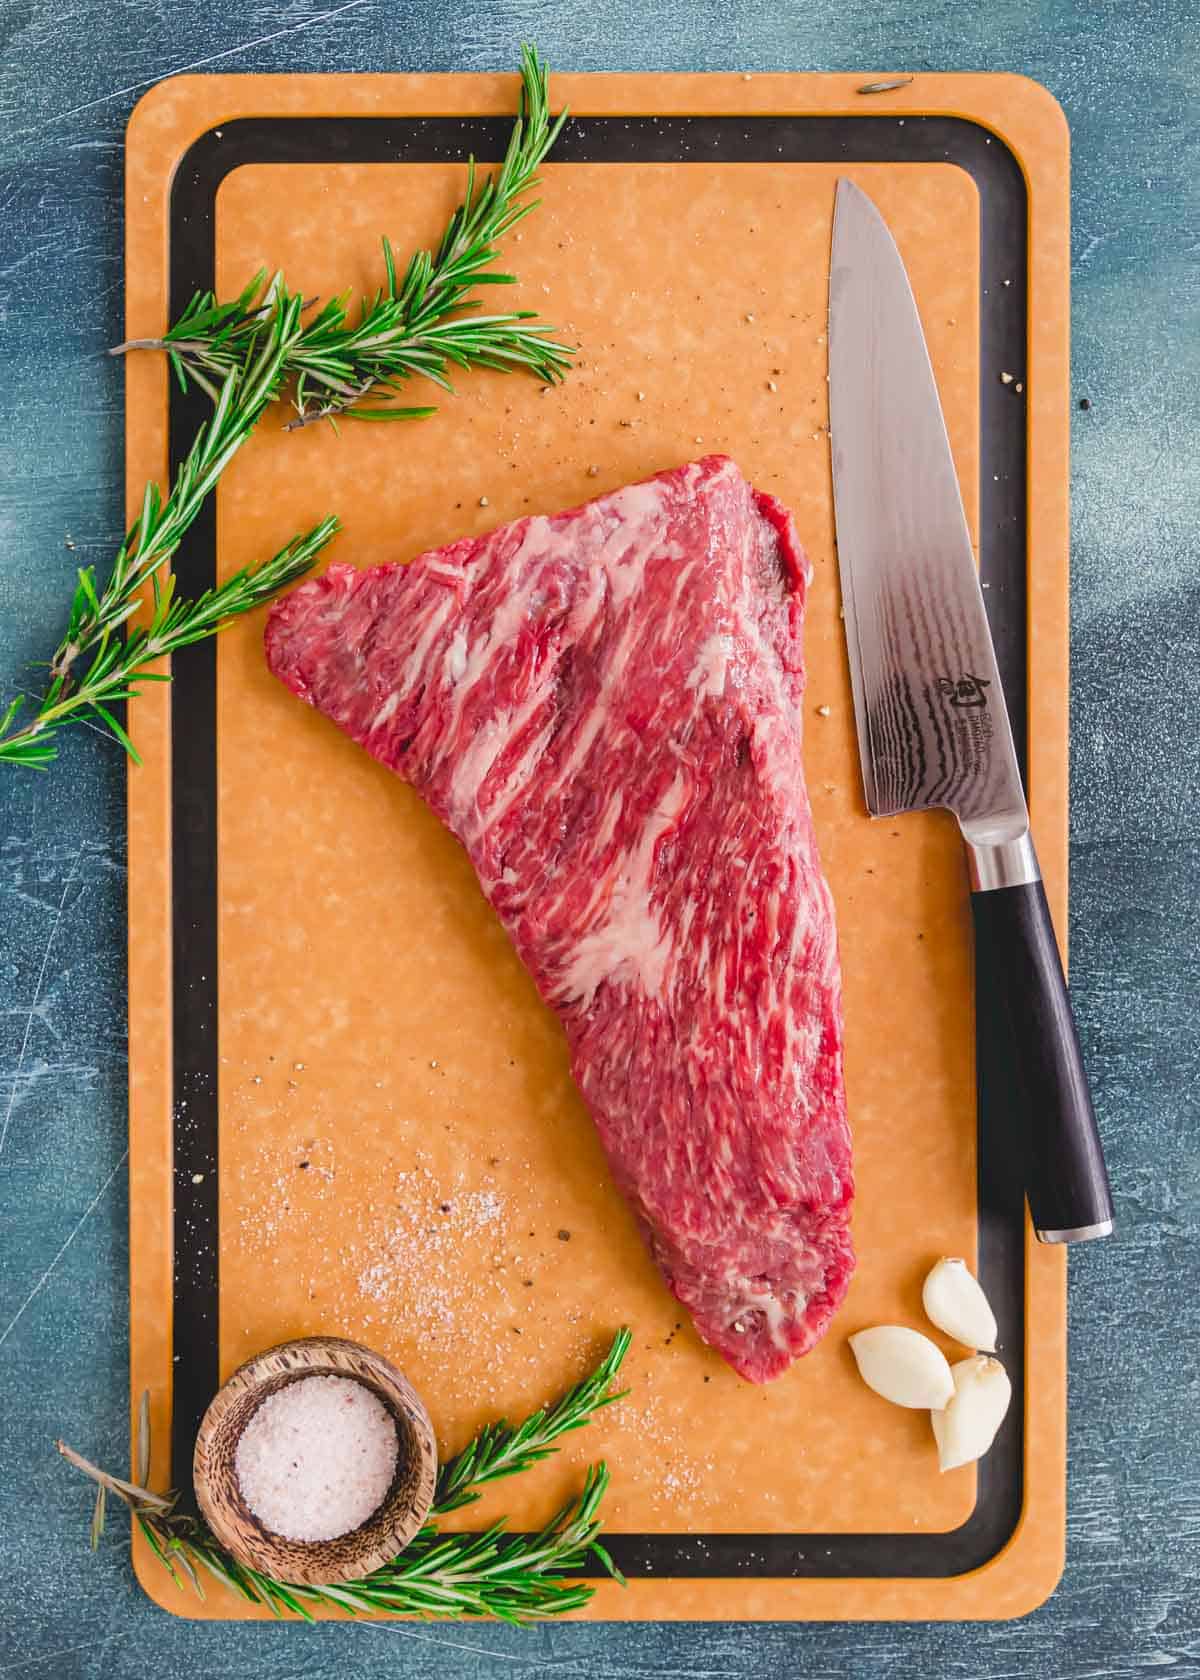 Raw tri tip steak on a cutting board with rosemary, garlic and a chef's knife.